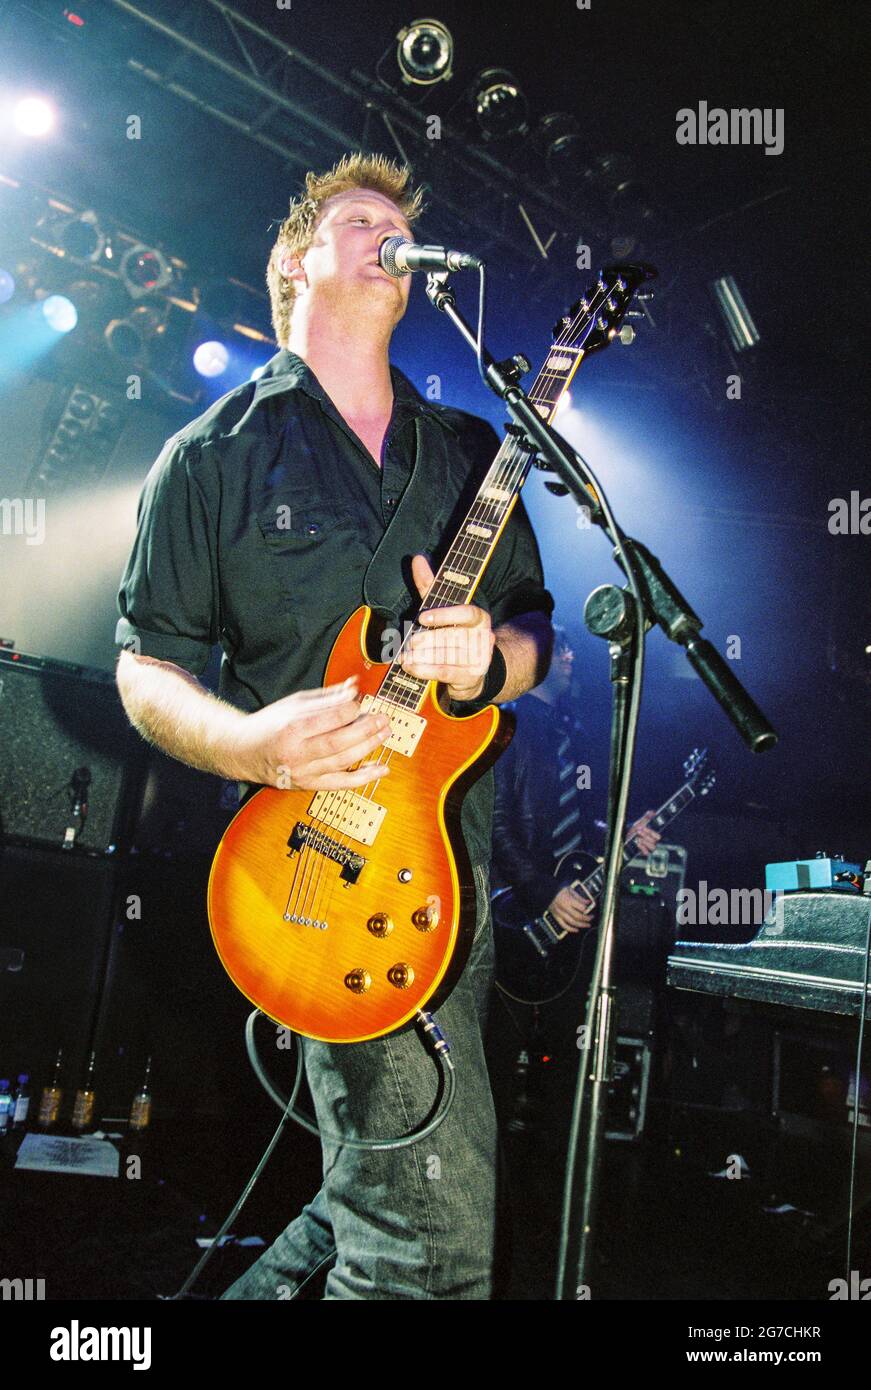 Queens of the stoneage QOTSA performing at the Mean Fiddler 2 25th June 2002, London Astoria Theatre, London, England, United Kingdom. Stock Photo